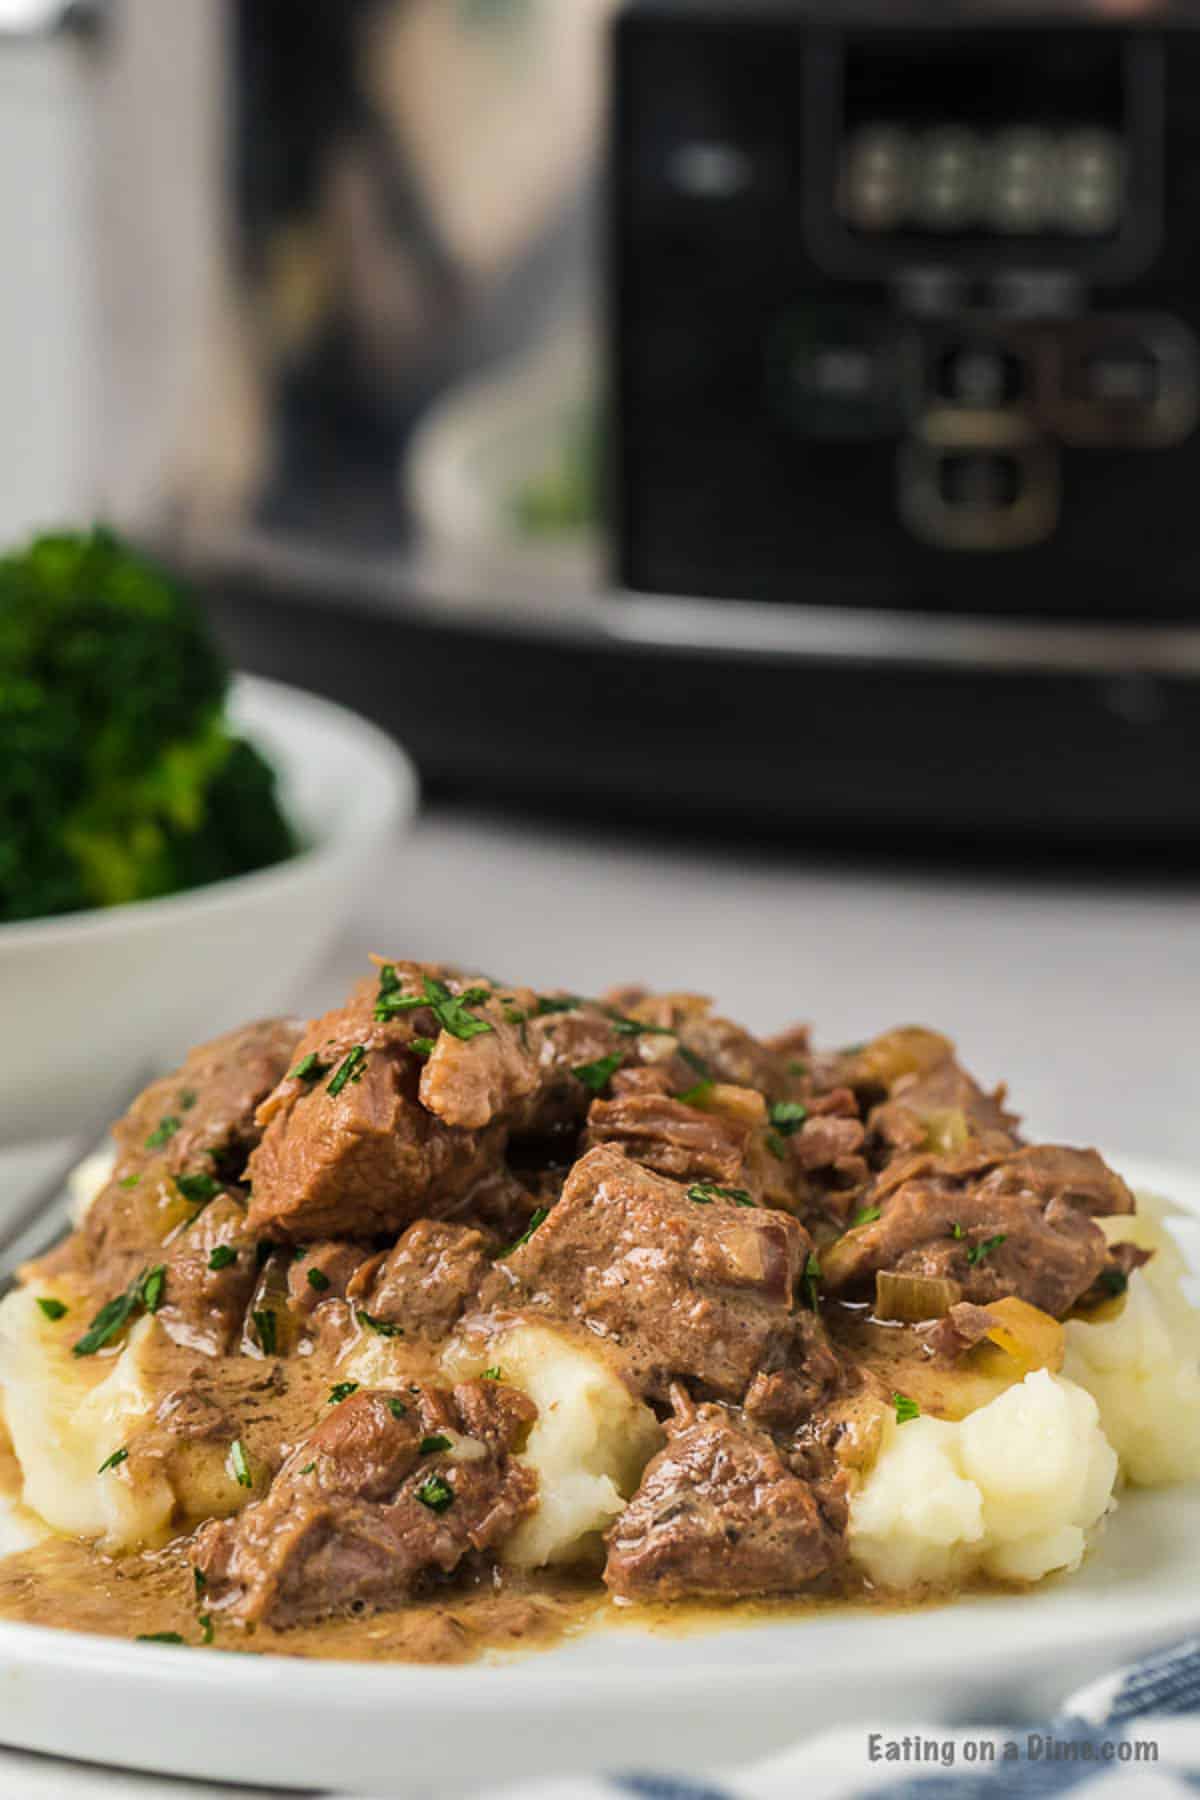 Beef Tips and gravy over mashed potatoes on a plate